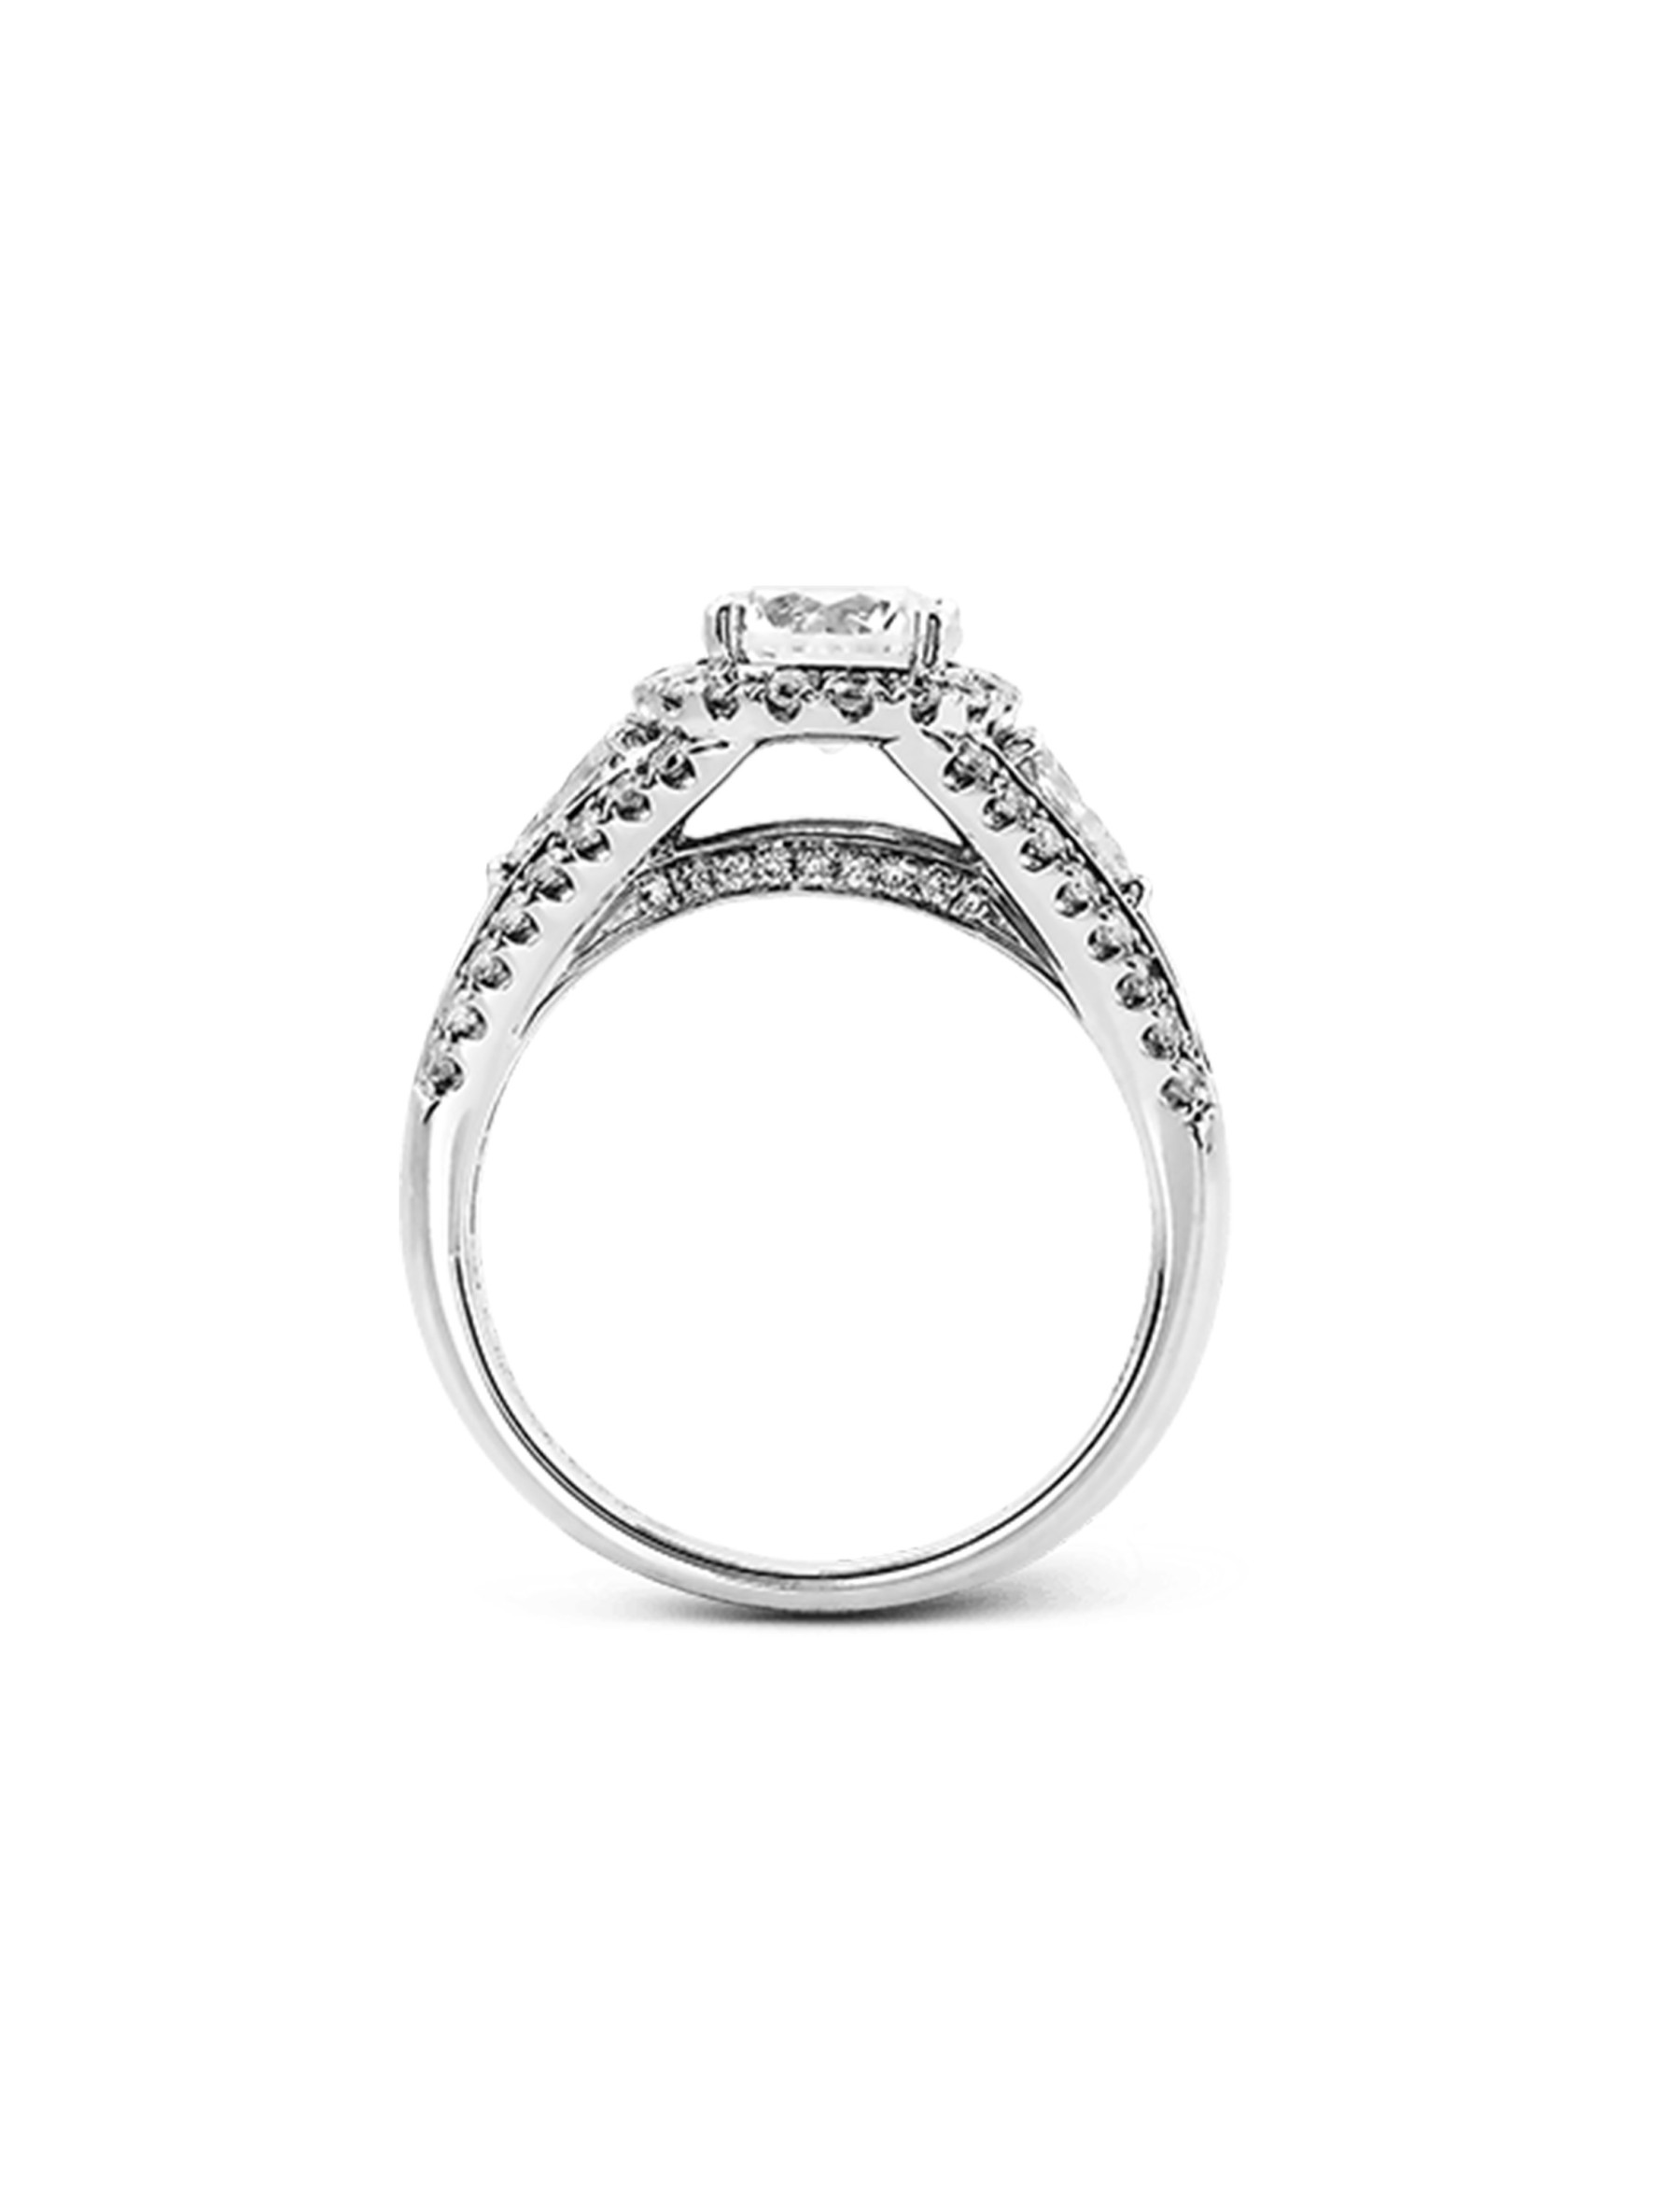 Simon G Round Halo Three Stone Pave Diamond Engagement Ring Setting in White Gold side view